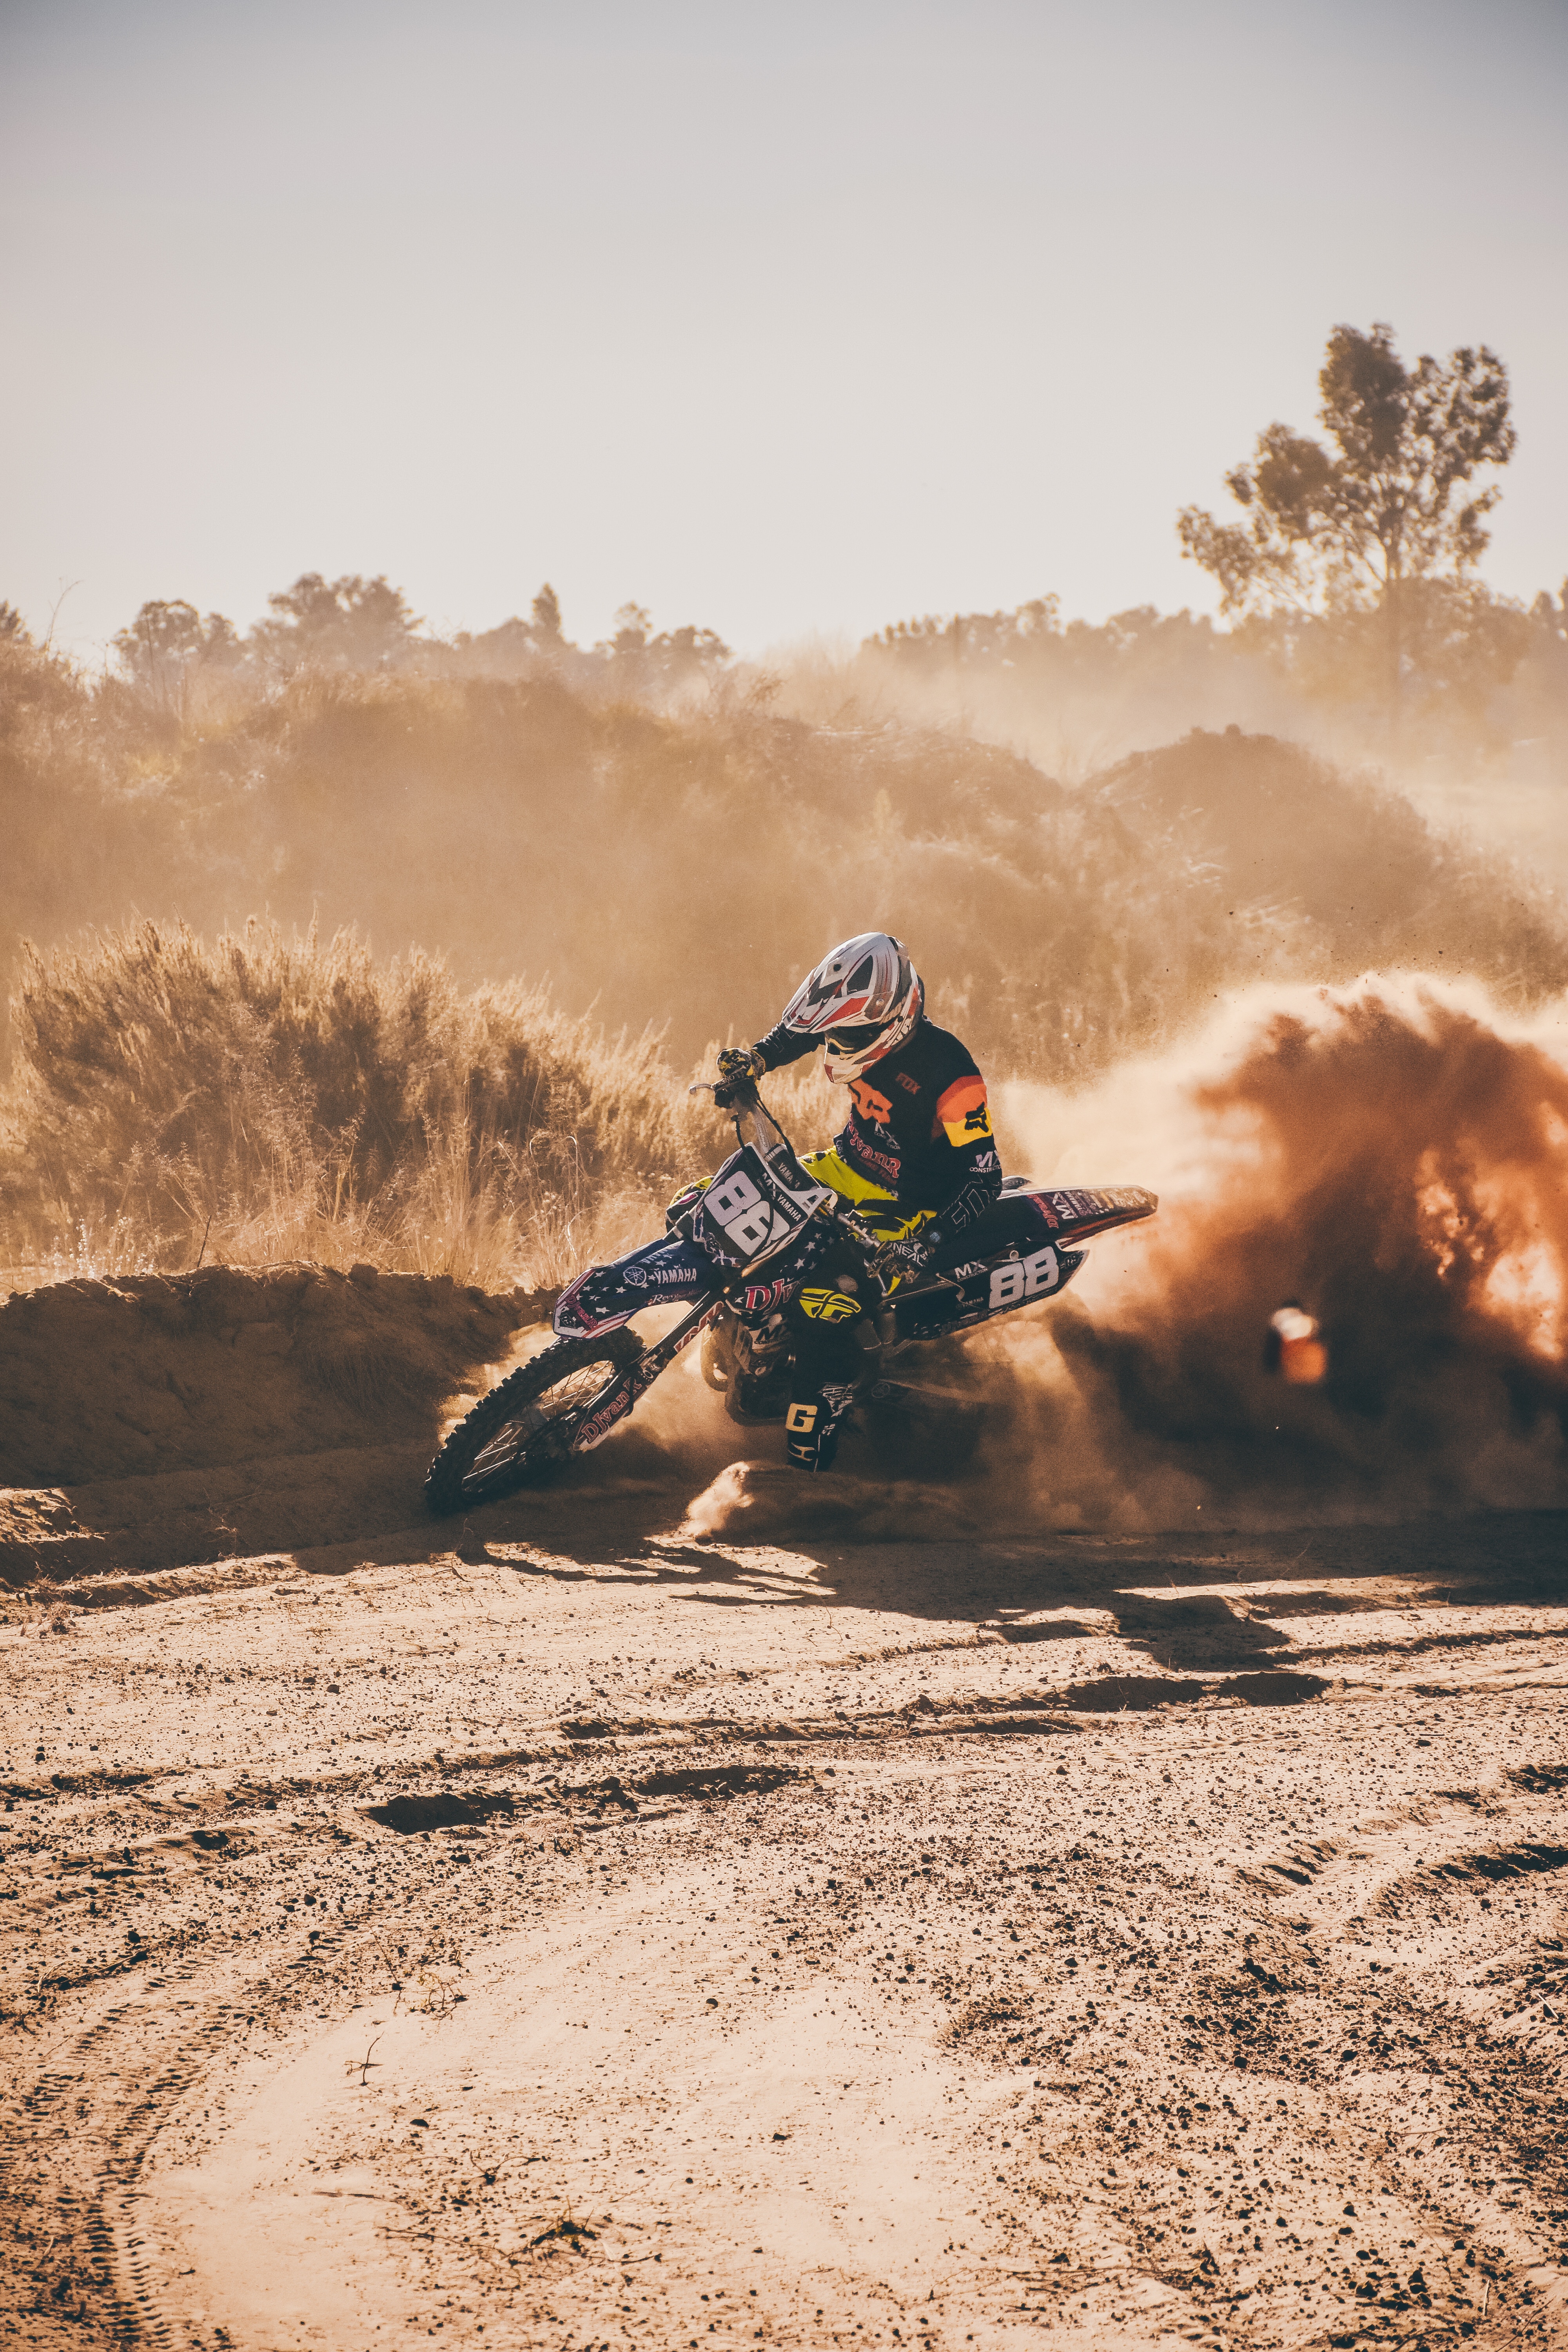 off road, sports, rally, races, motorcyclist, motorcycle, impassability, drift